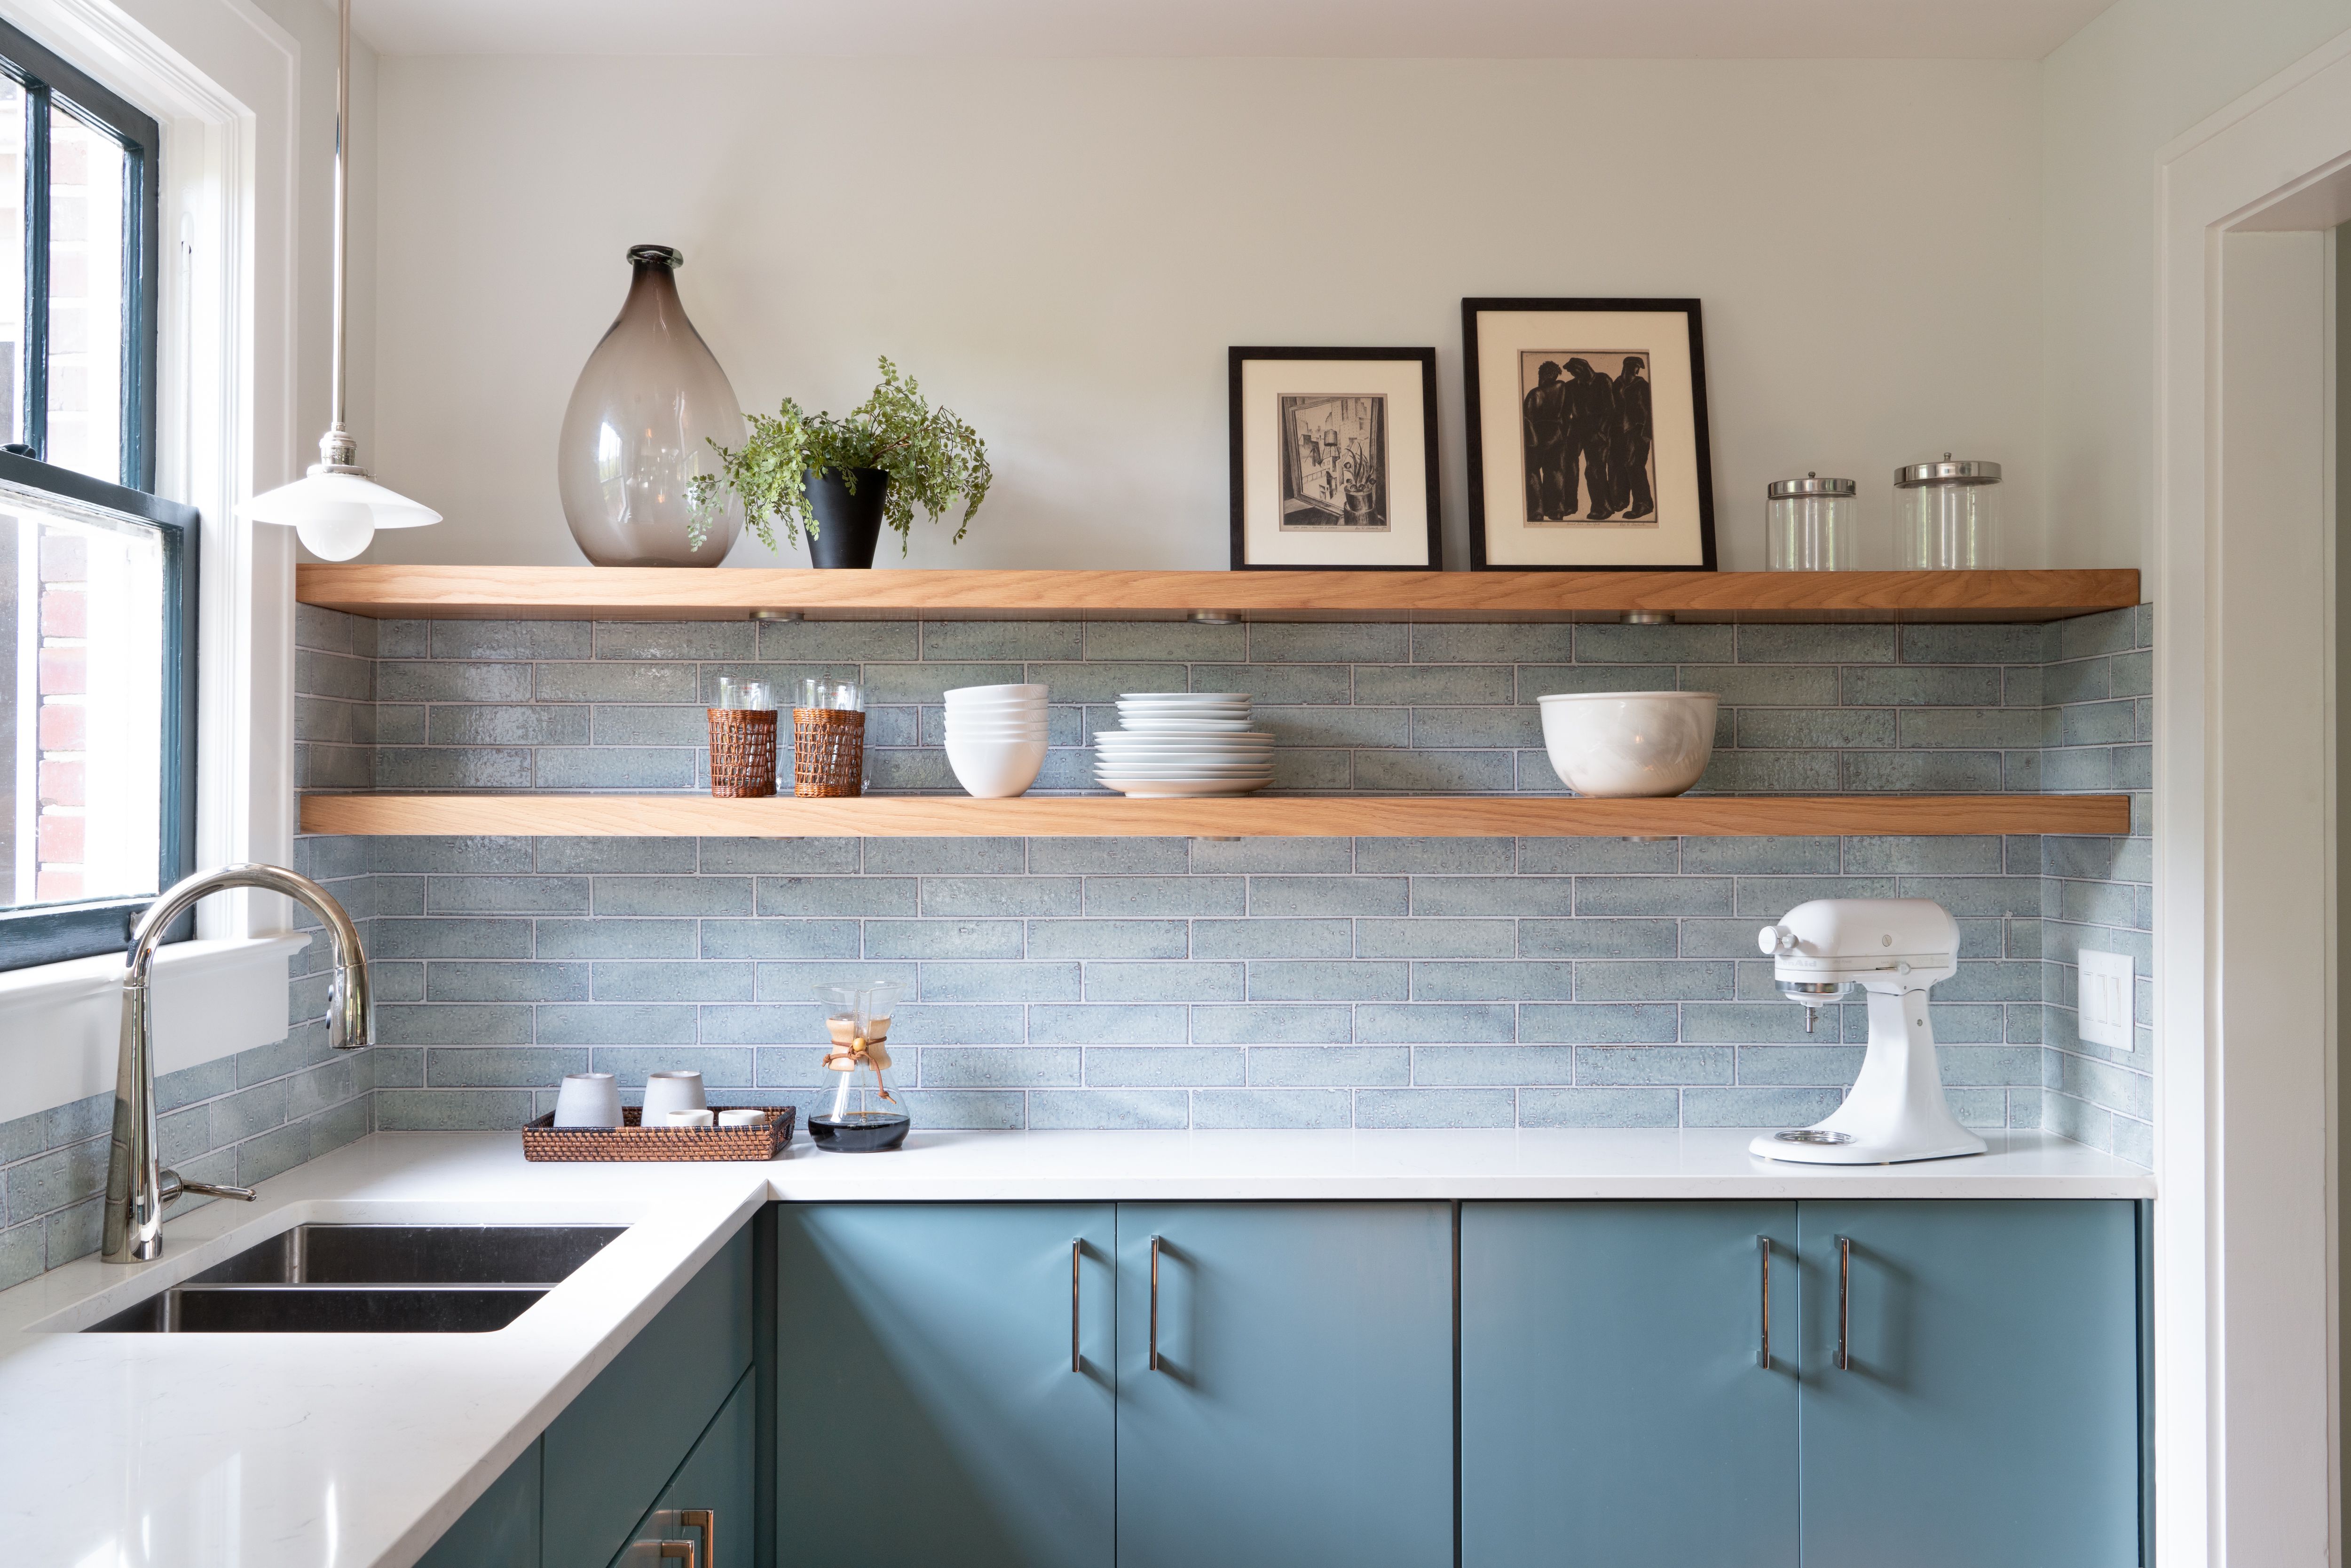 The Best Kitchen Countertops for Your Home, According to Design Pros